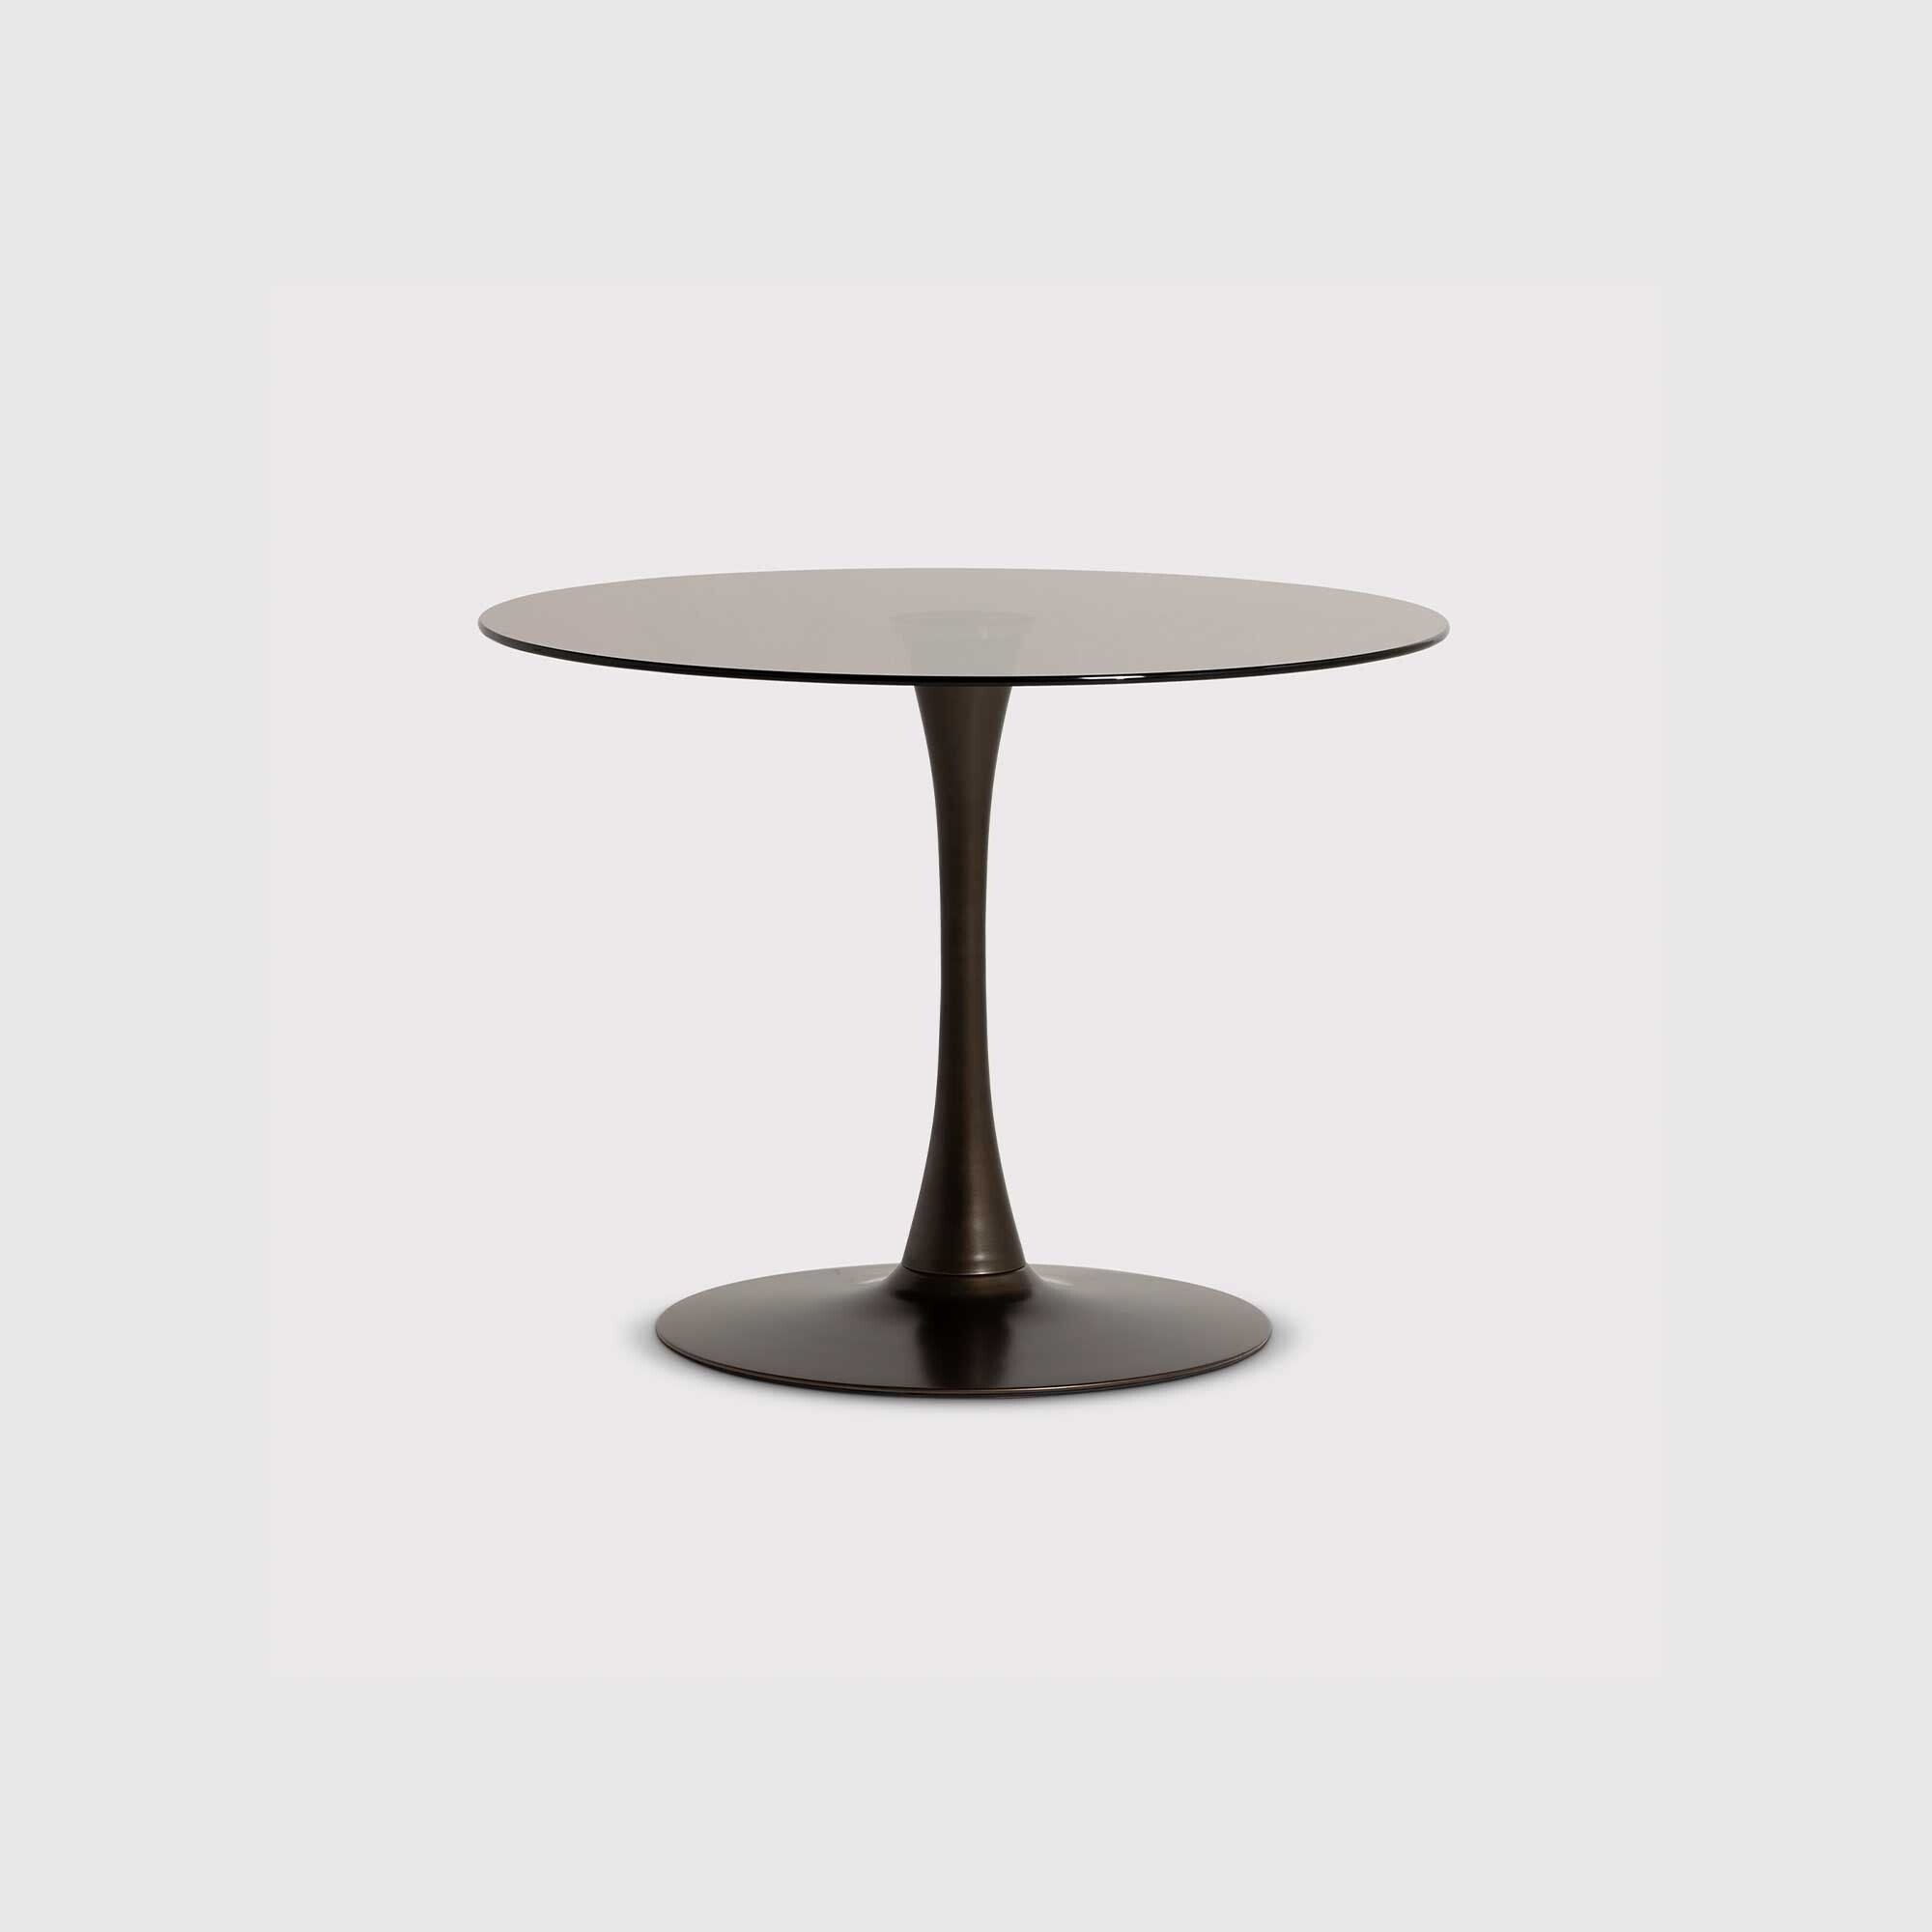 Rumi Round Dining Table 100cm, Round, Brown Glass | Barker & Stonehouse